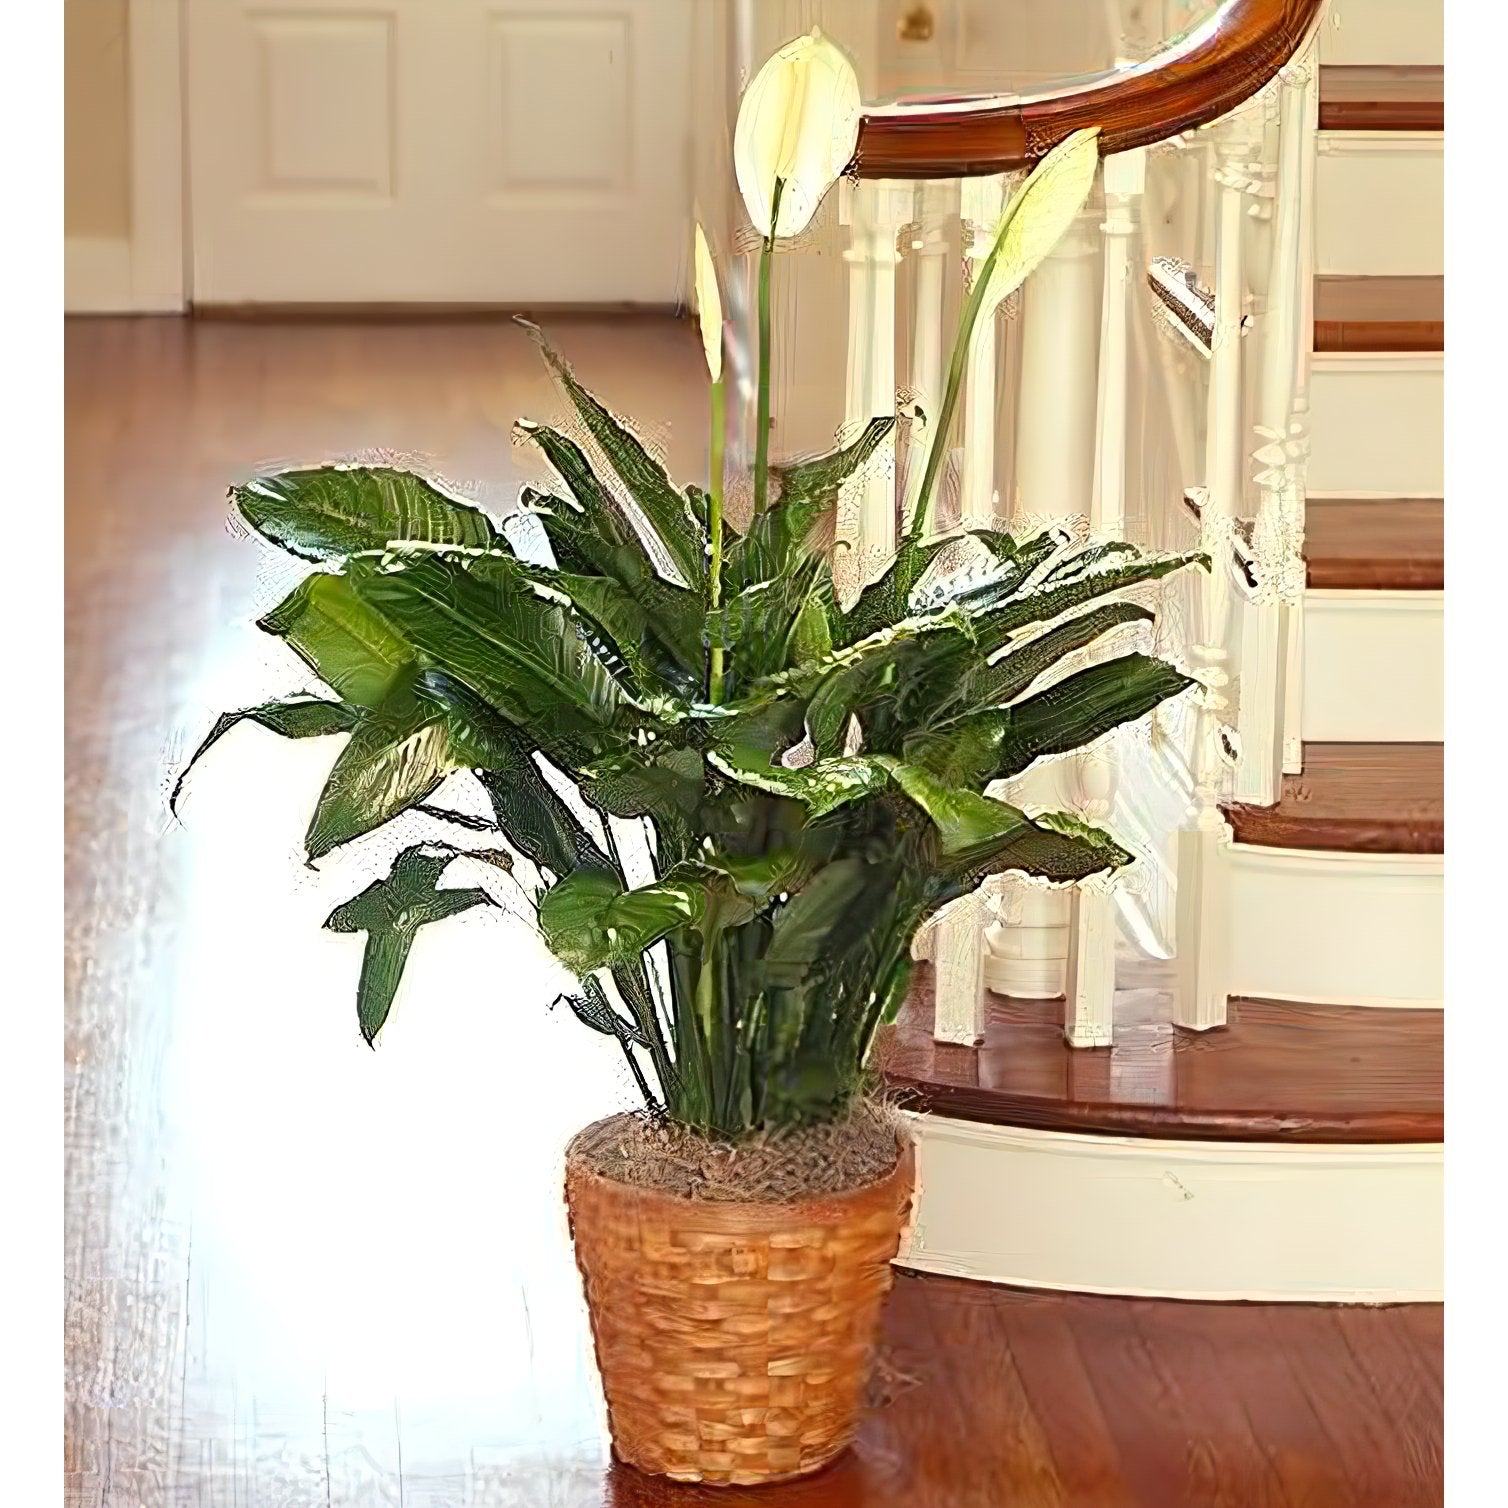 Spathiphyllum Plant for Sympathy - Plants - Queens Flower Delivery